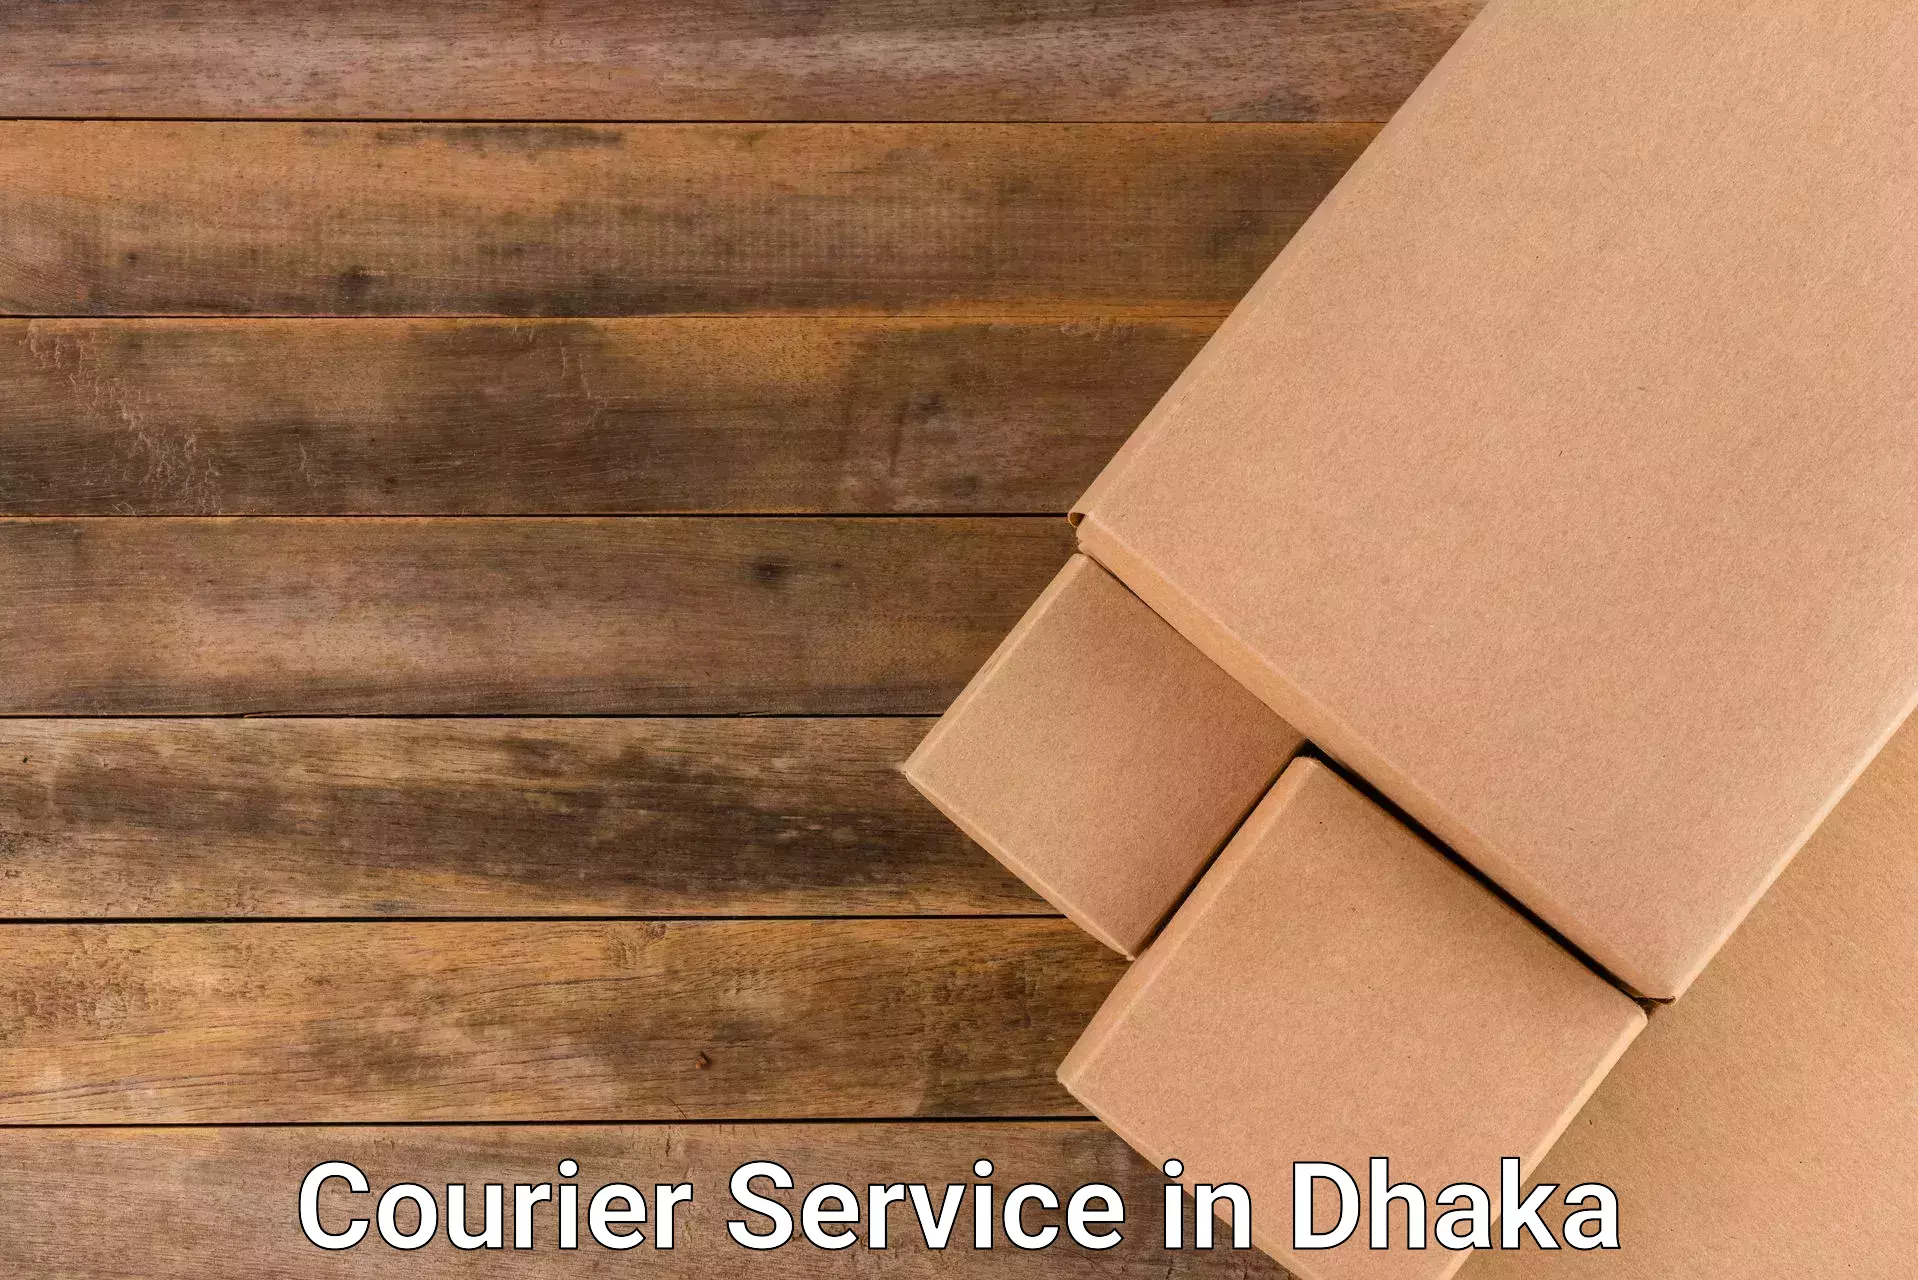 Enhanced delivery experience in Dhaka